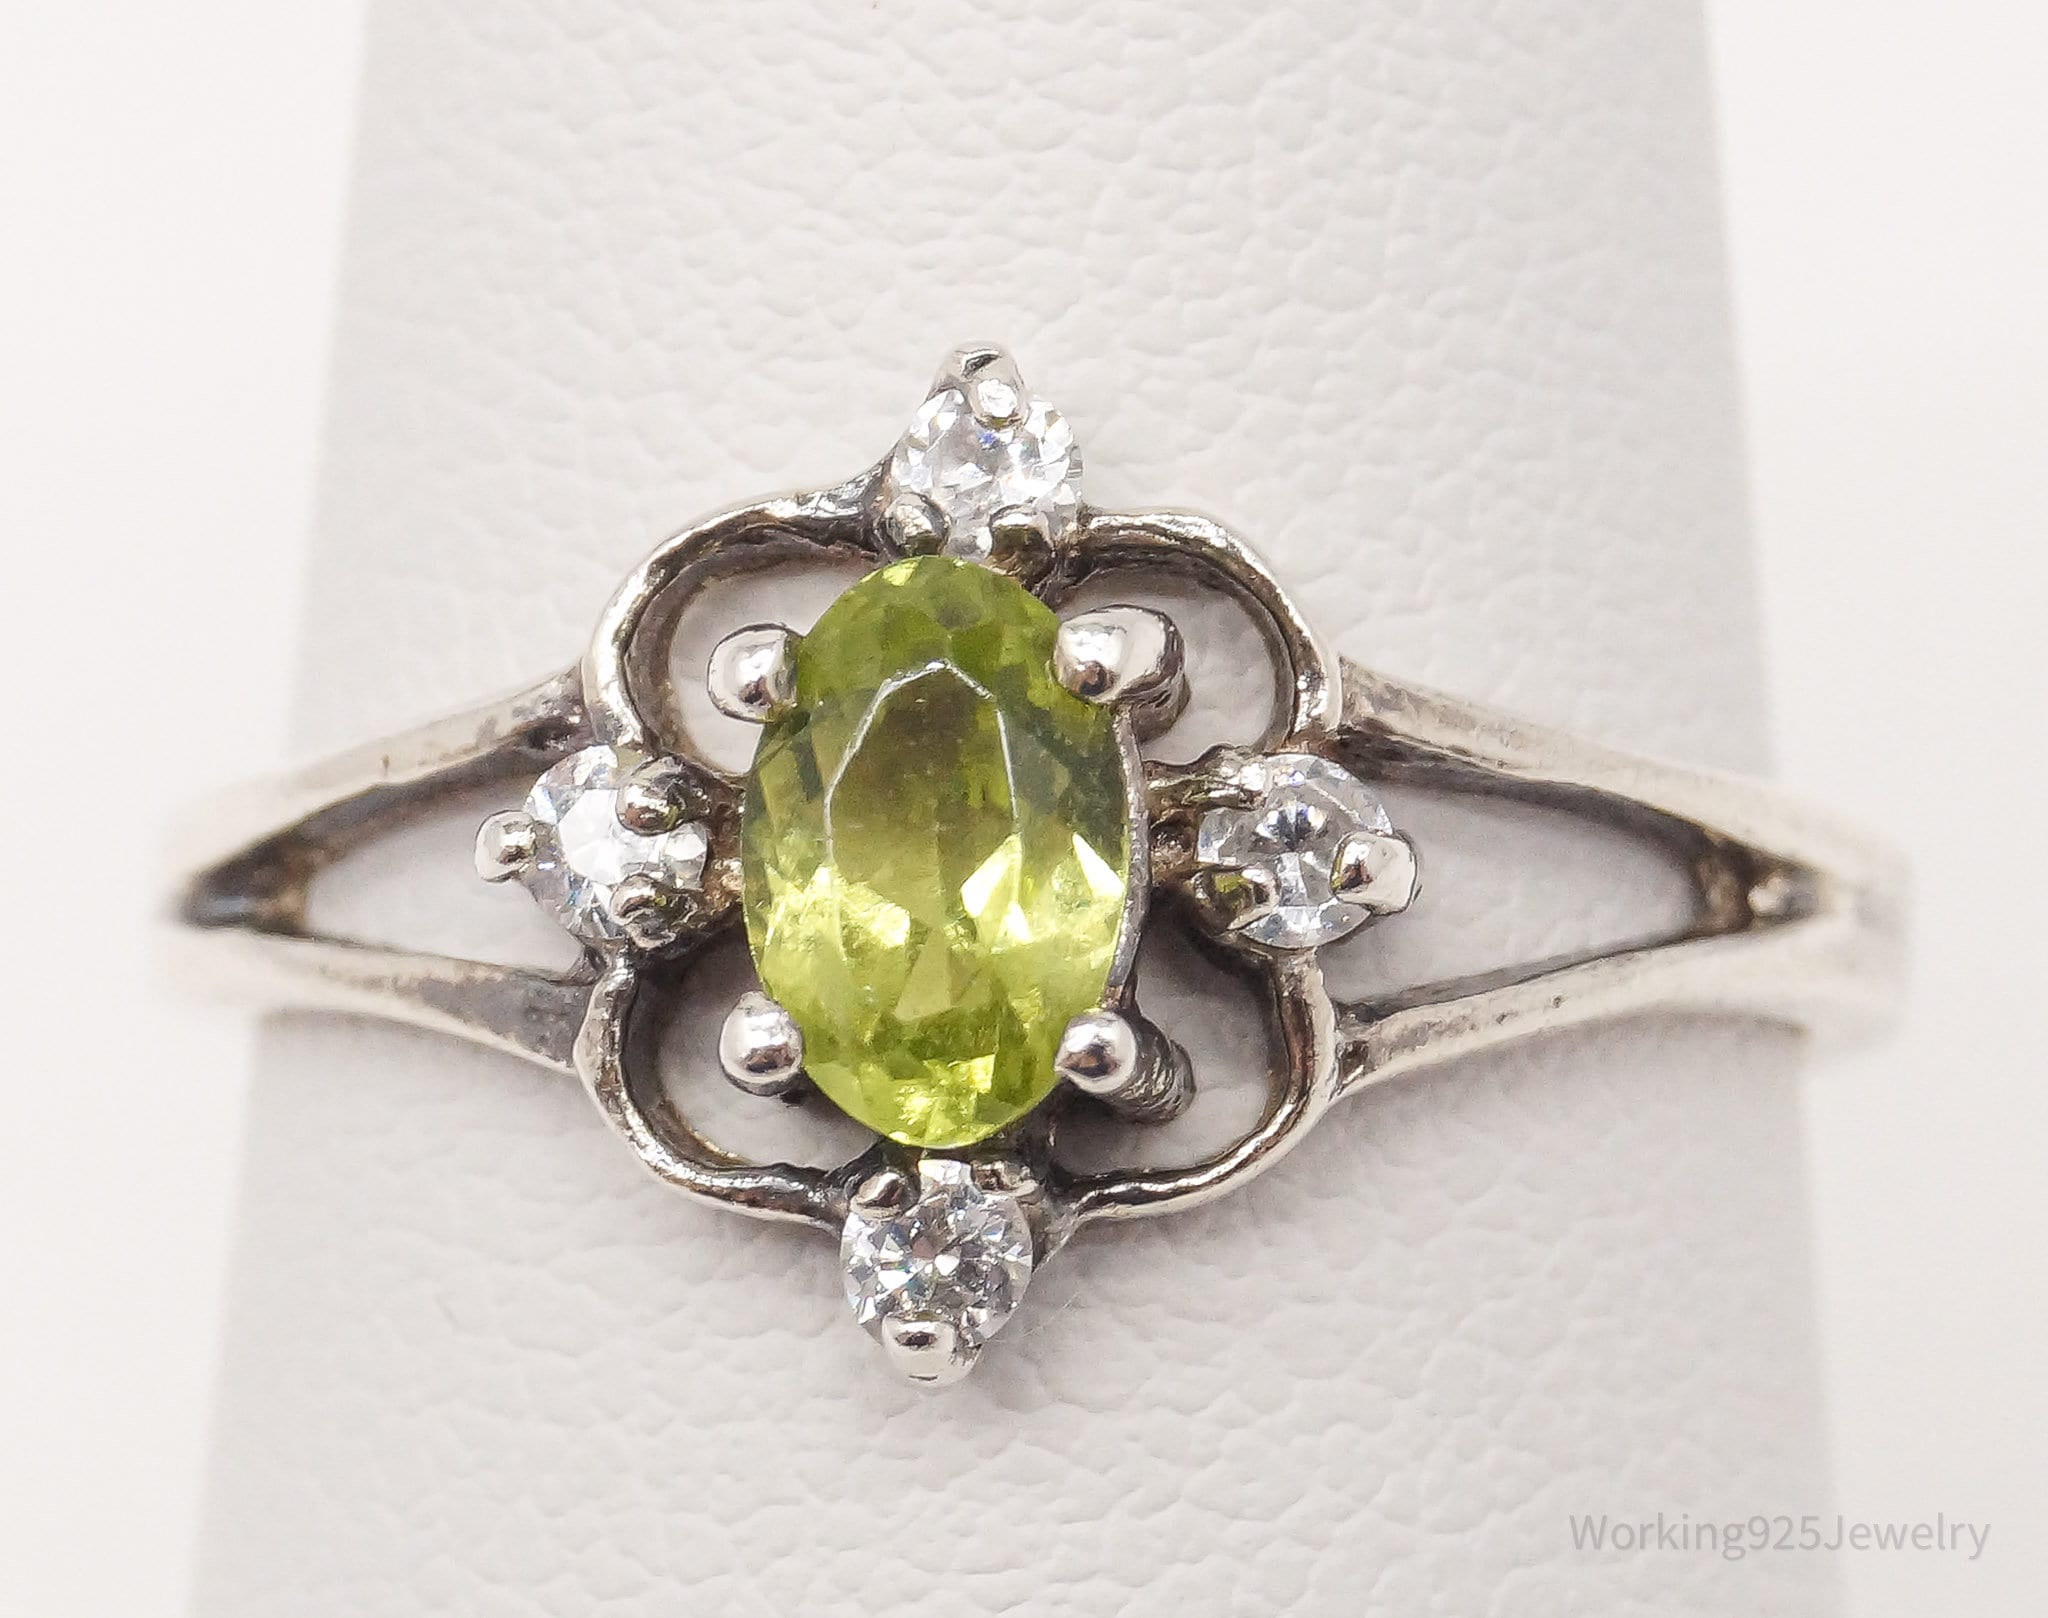 Vintage Peridot Cubic Zirconia Sterling Silver Ring - Size 7